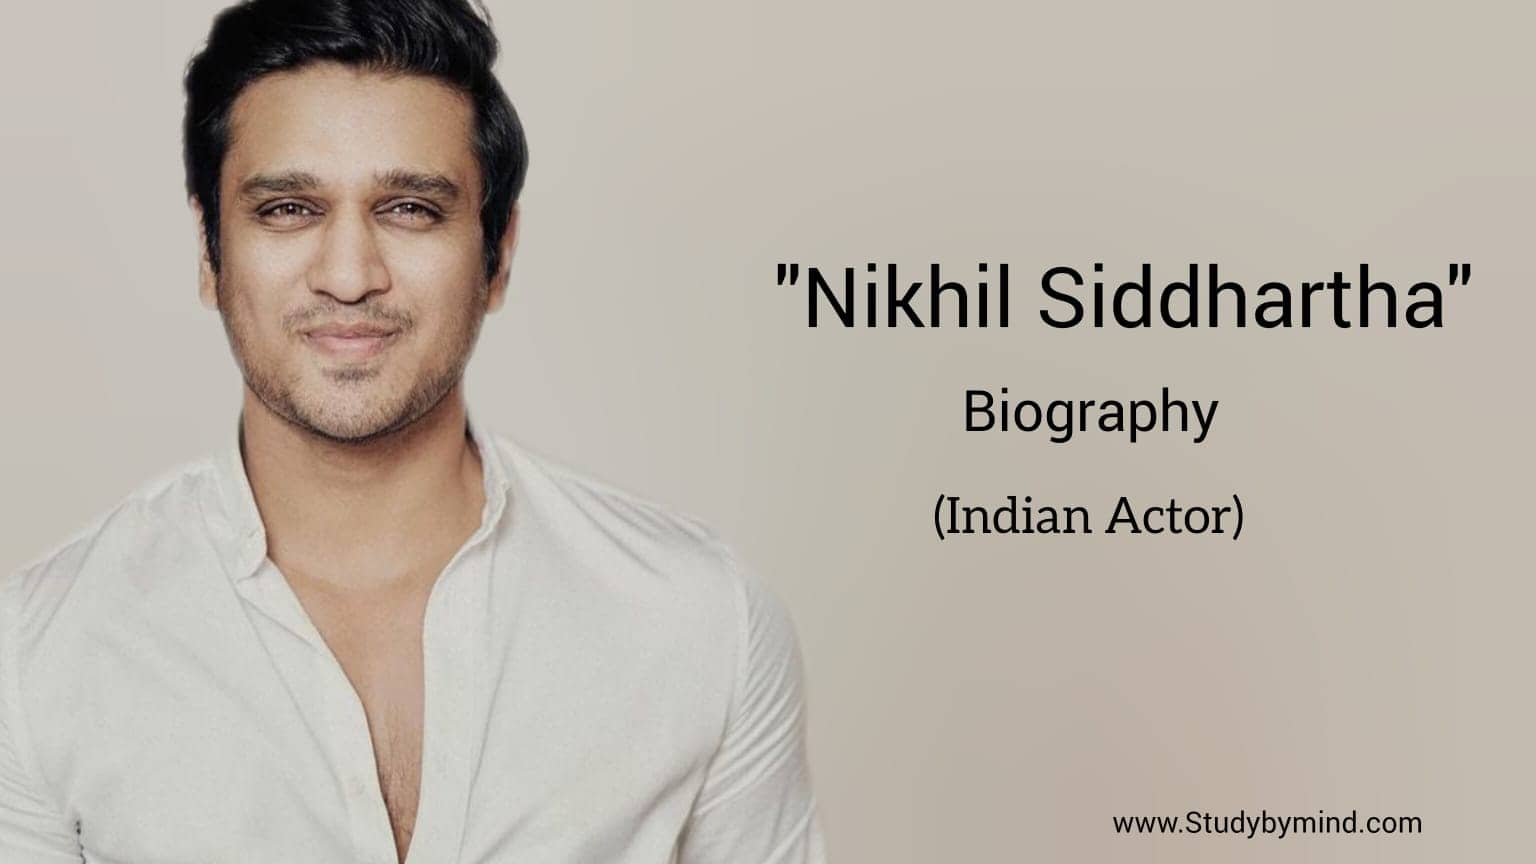 You are currently viewing Nikhil Siddhartha biography in english (Indian Actor)